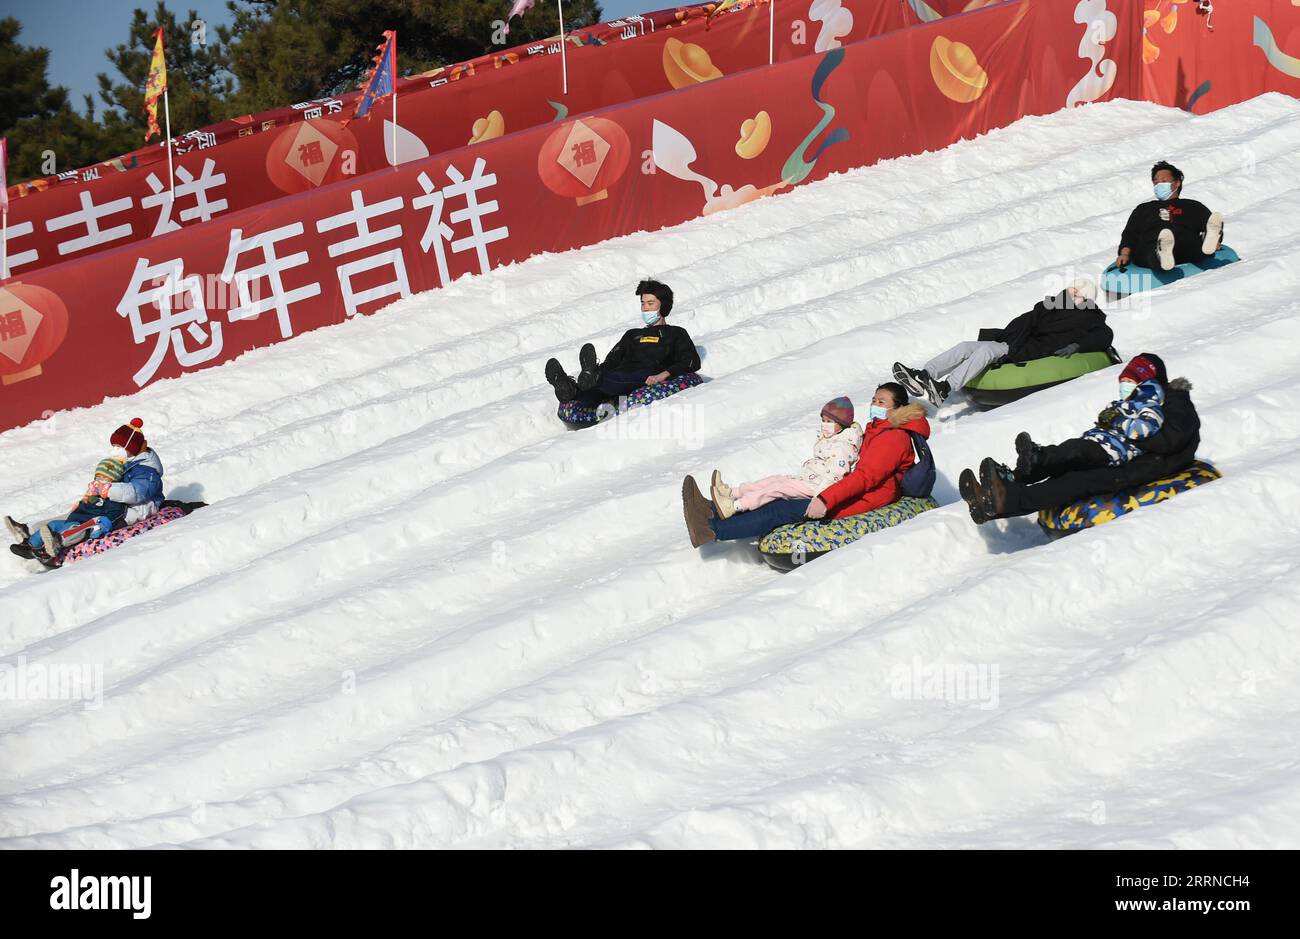 230103 -- BEIJING, Jan. 3, 2023 -- Visitors have fun during the ice and snow festival at Yuanmingyuan Park in Beijing, capital of China, Dec. 31, 2022.  Xinhua Headlines: China sees New Year consumption recovery, eyes 2023 growth LuoxXiaoguang PUBLICATIONxNOTxINxCHN Stock Photo